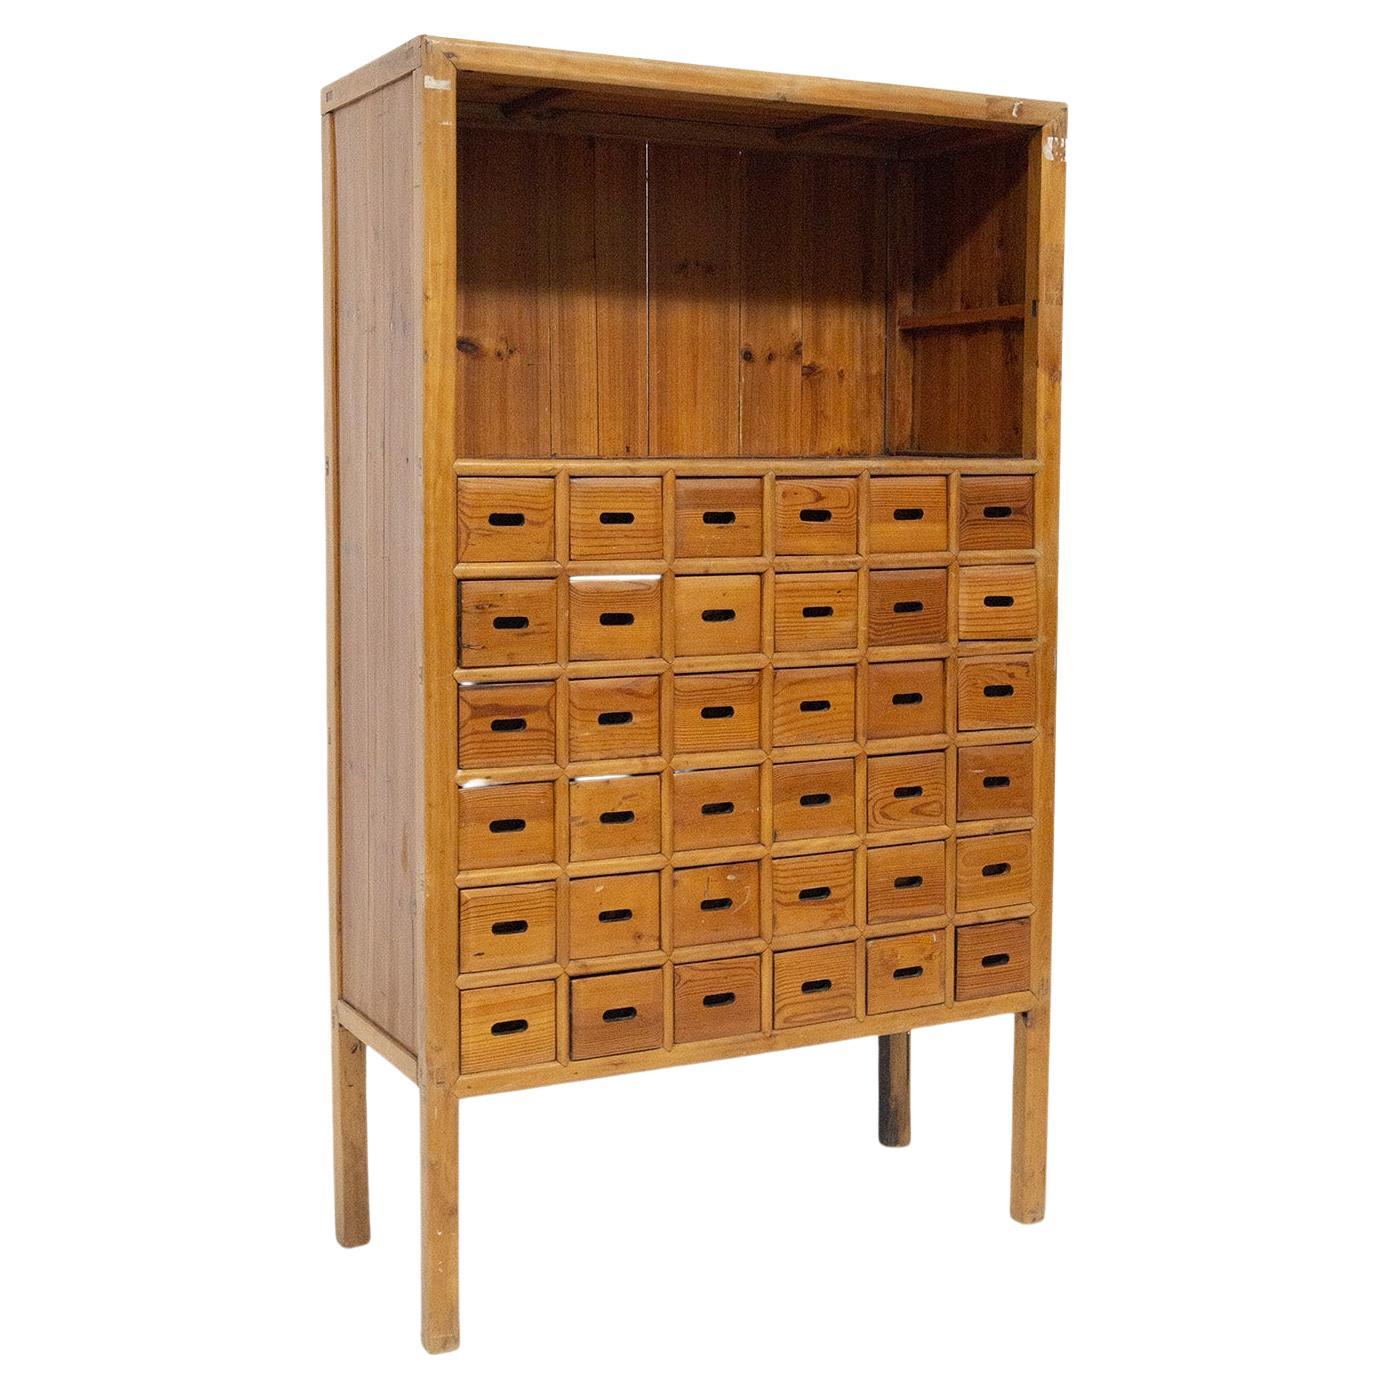 Italian Wooden Storage Cabinet with Drawers